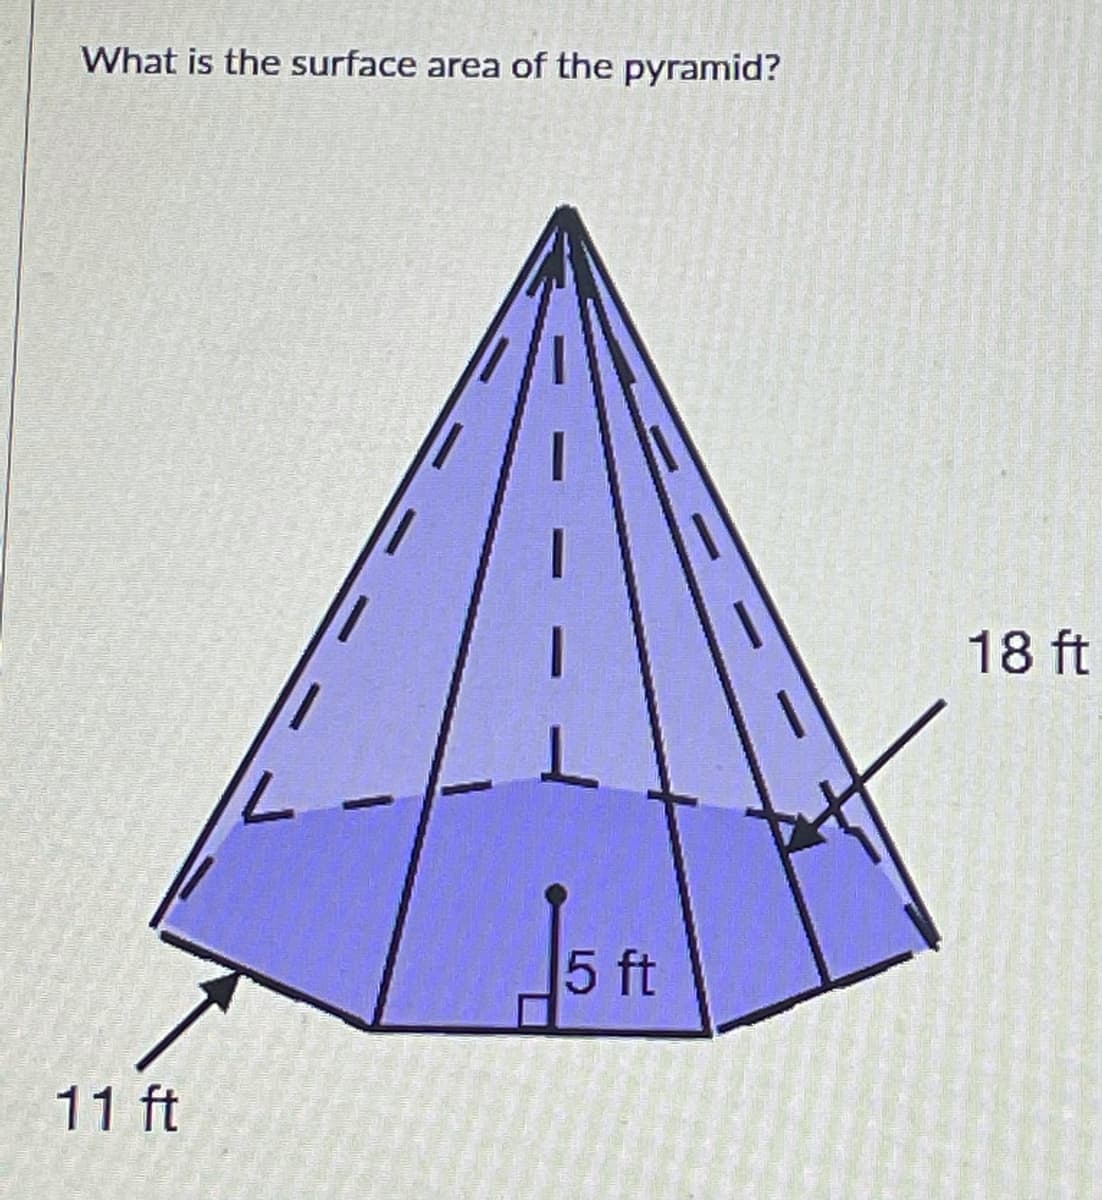 What is the surface area of the pyramid?
18 ft
5 ft
11 ft
